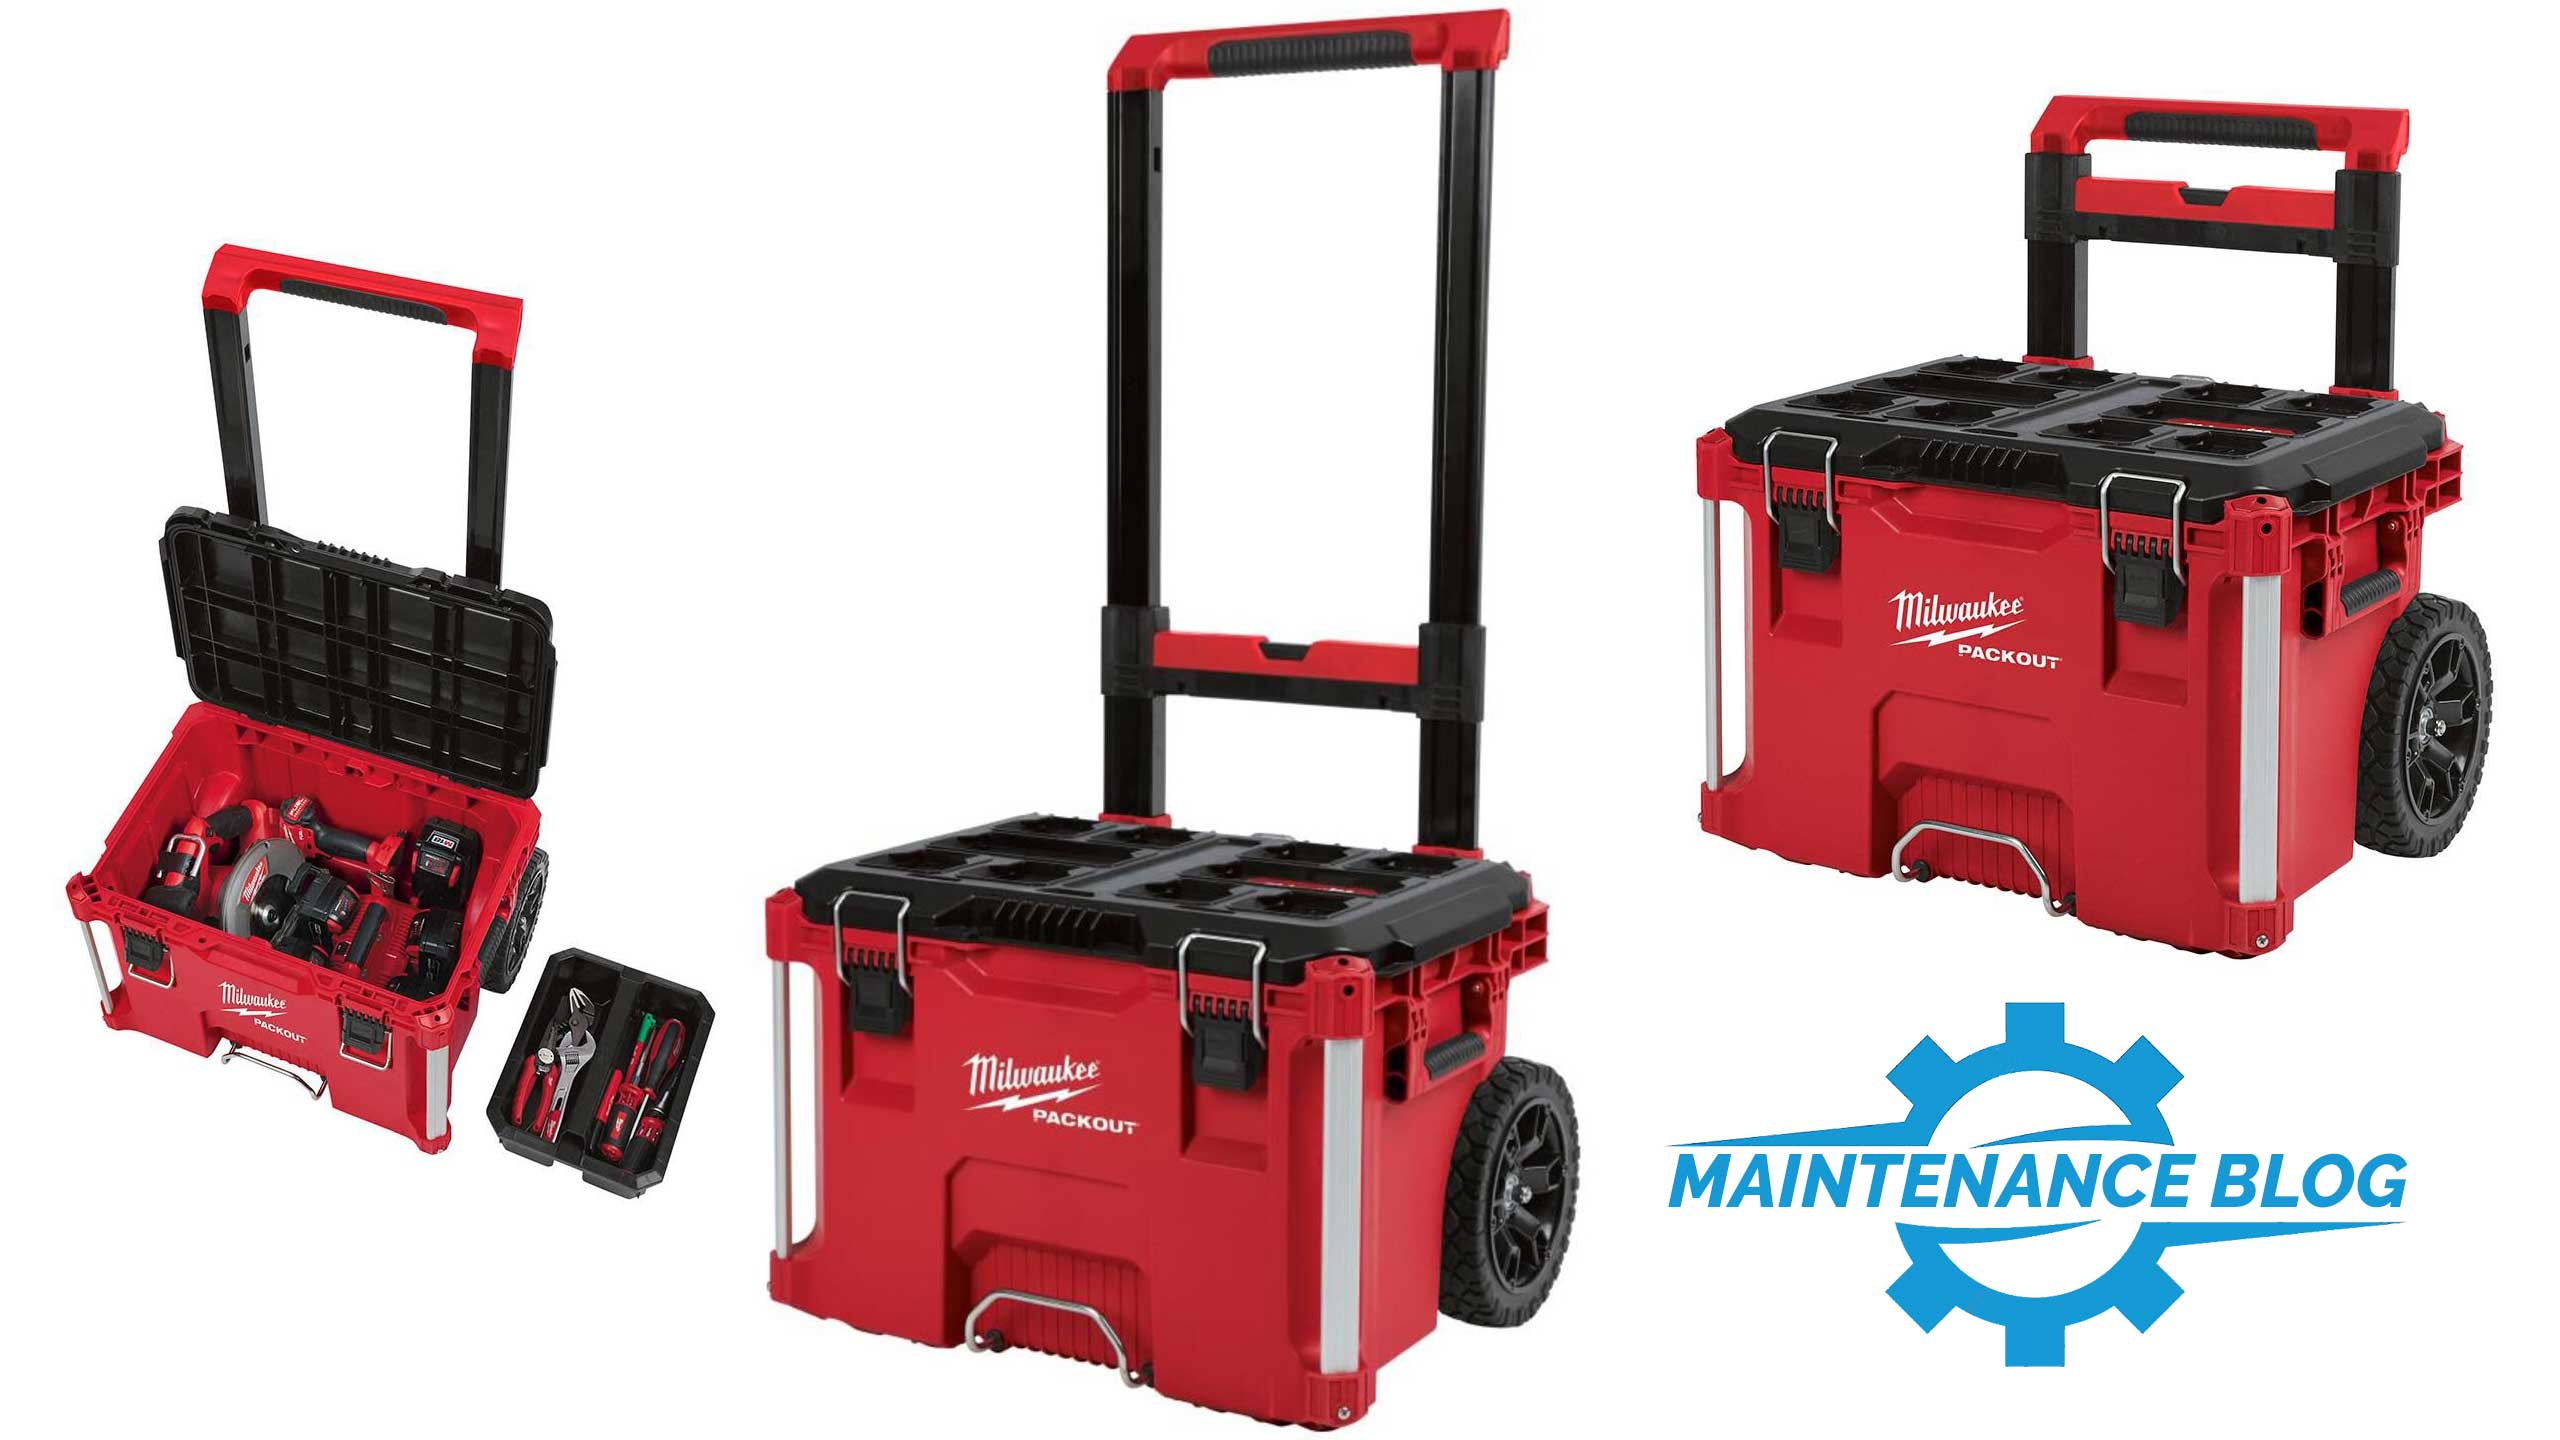 Milwaukee PACKOUT Rolling Tool Box 48-22-8426